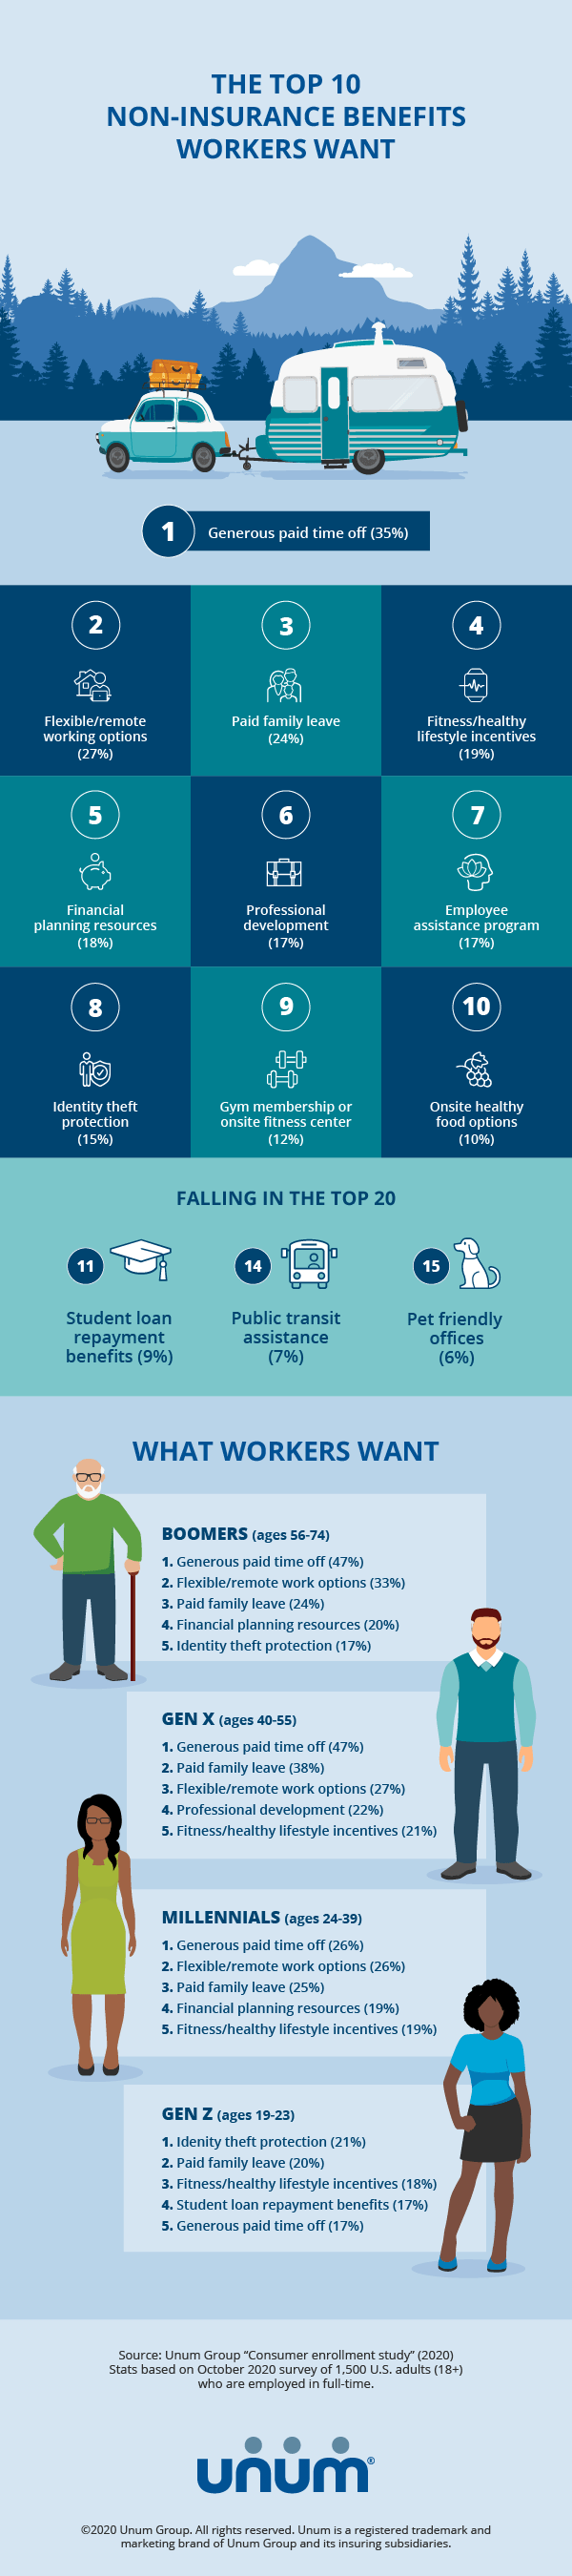 Infographic: What workers want 2020